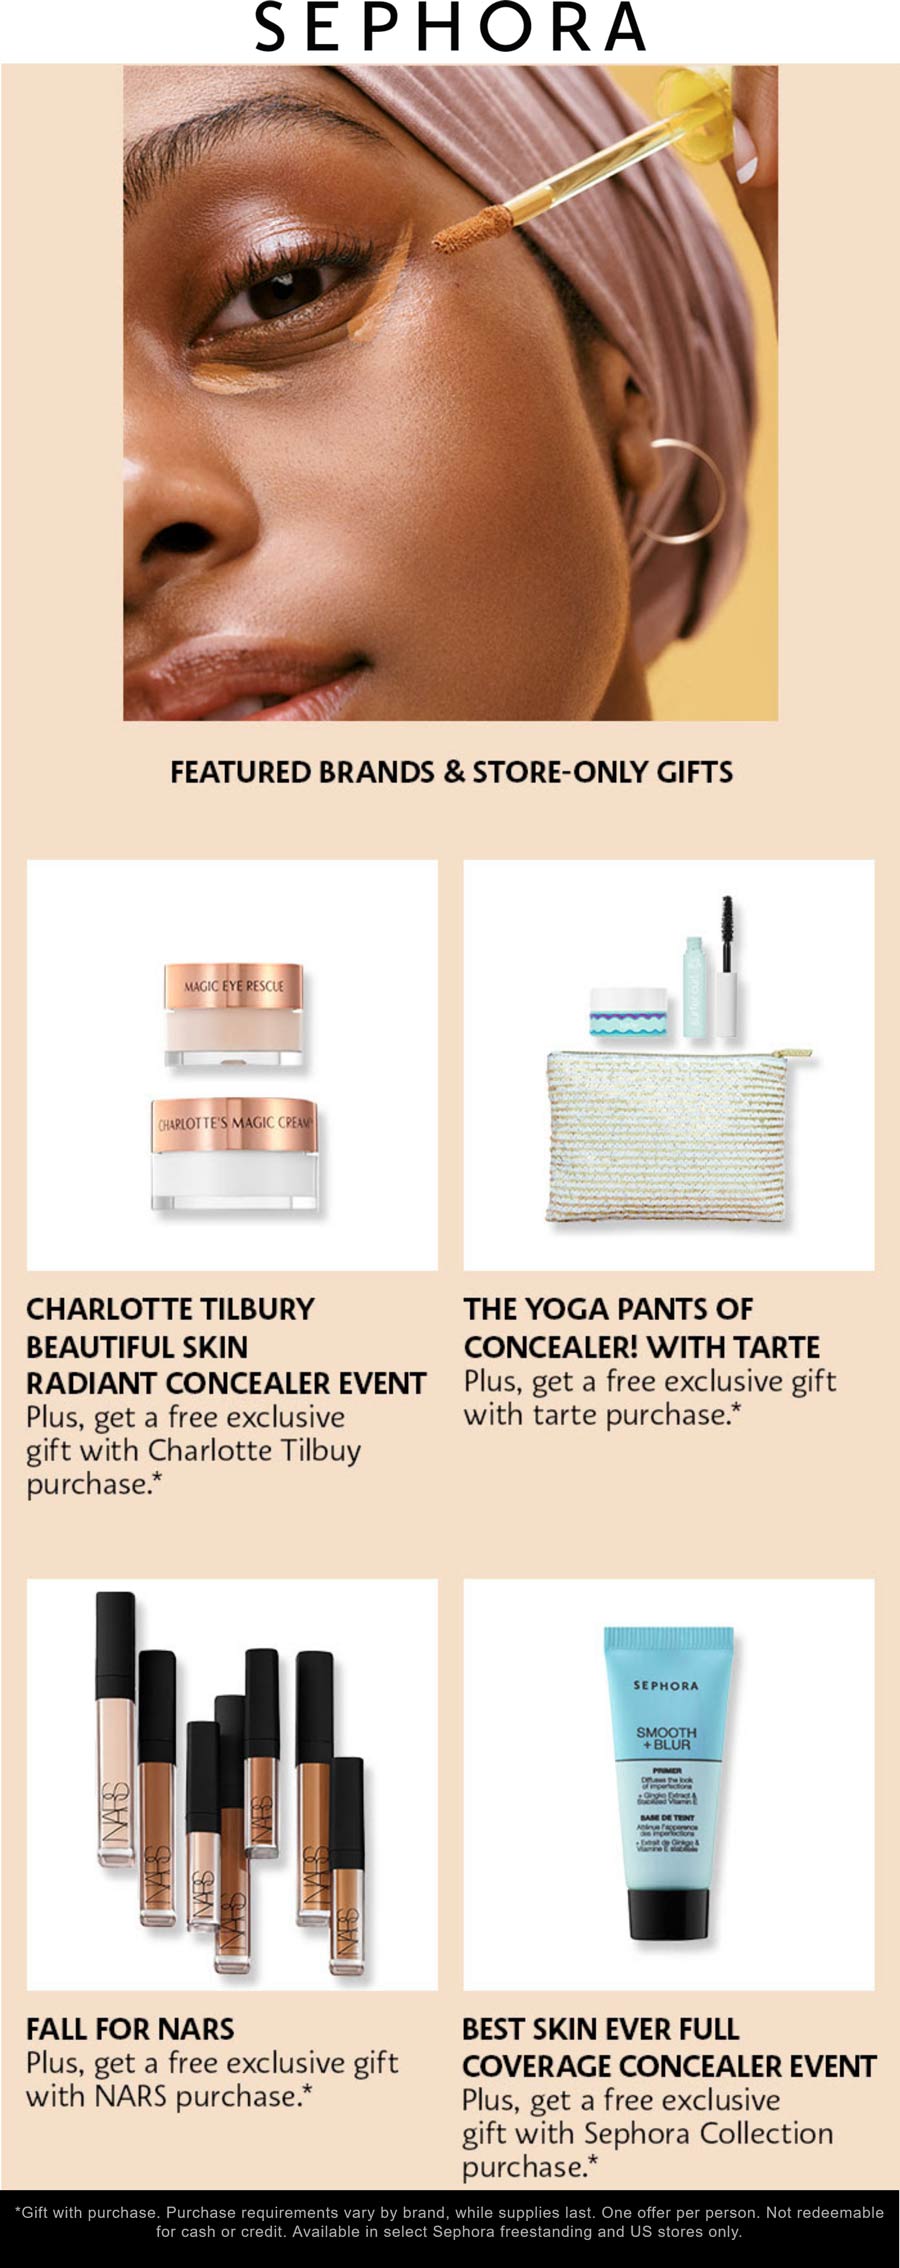 Sephora stores Coupon  Various item purchases come with free gifts at Sephora #sephora 